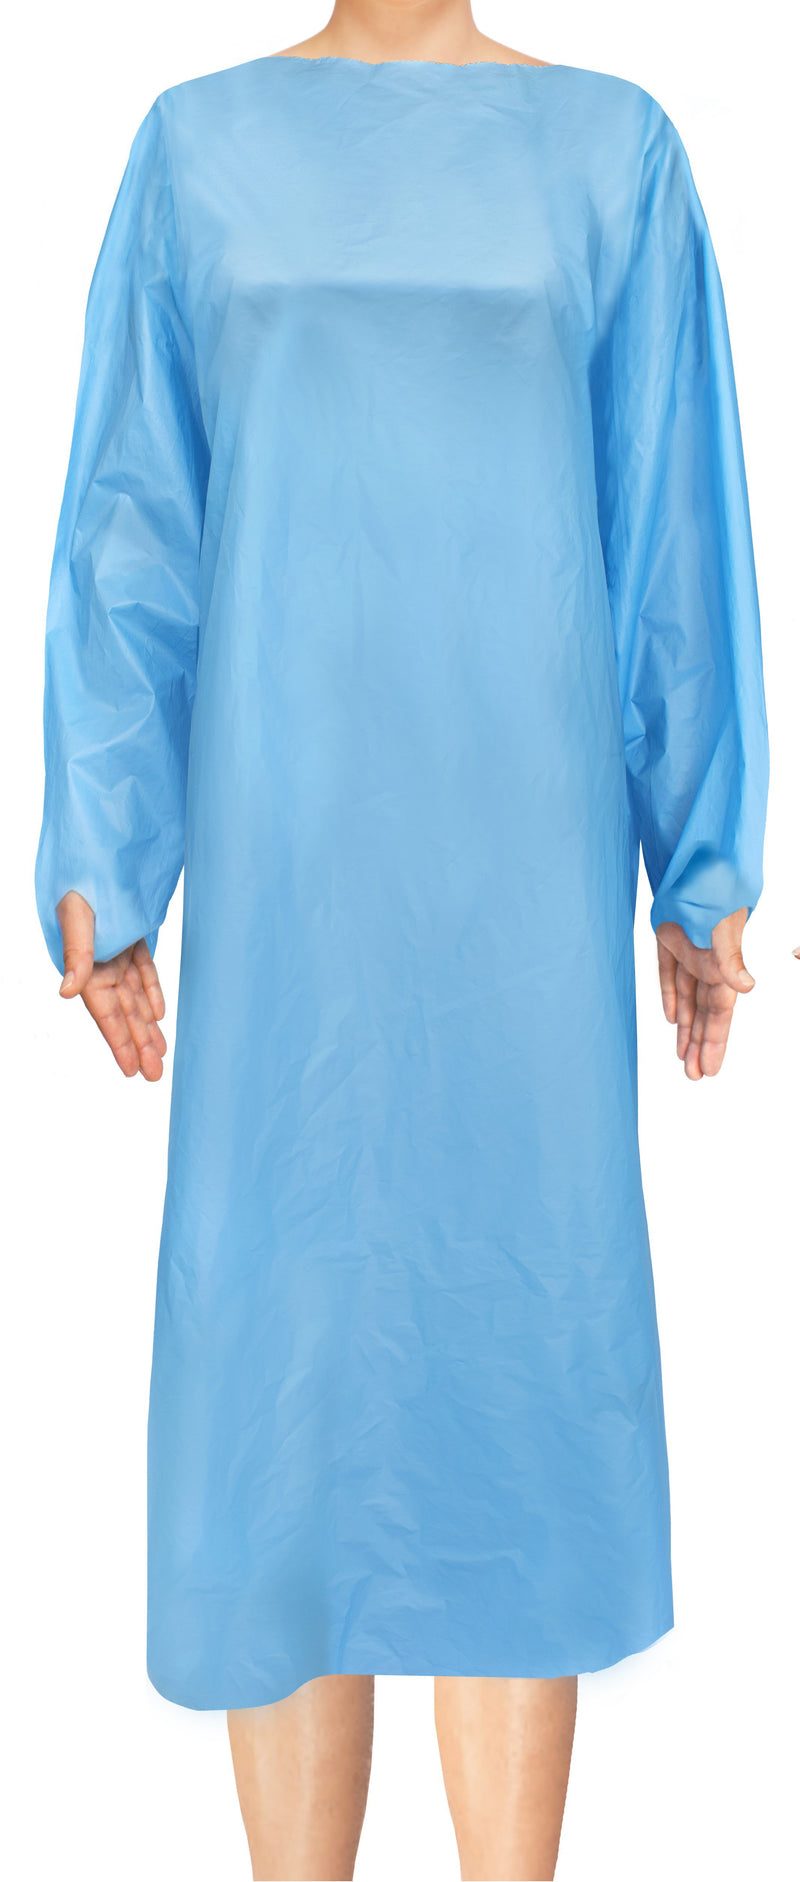 McKesson Open Back Over-the-Head Protective Procedure Gown, Universal, Blue